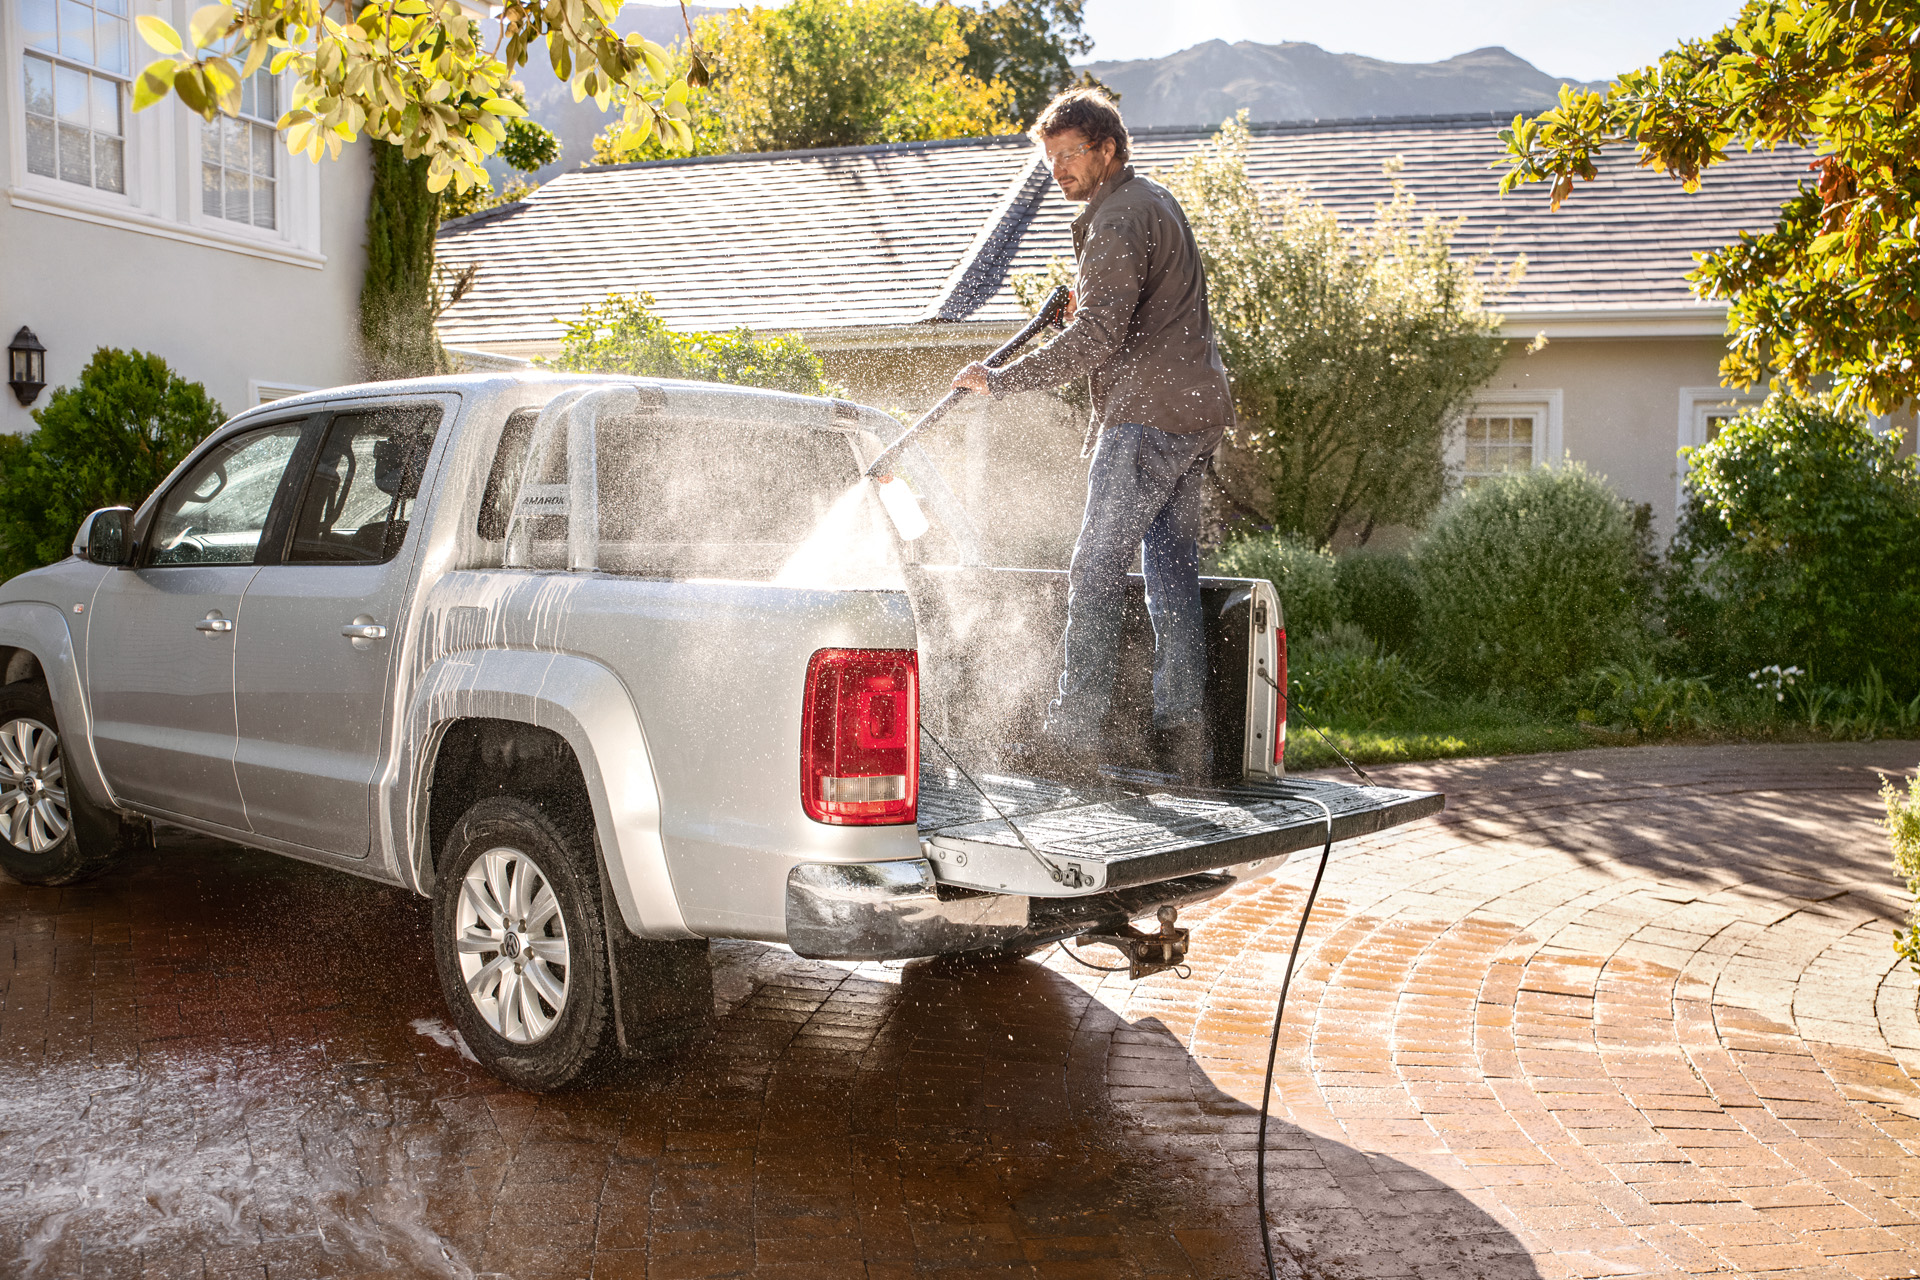 A man standing on the truck bed of a pick-up, cleaning the vehicle with a pressure washer